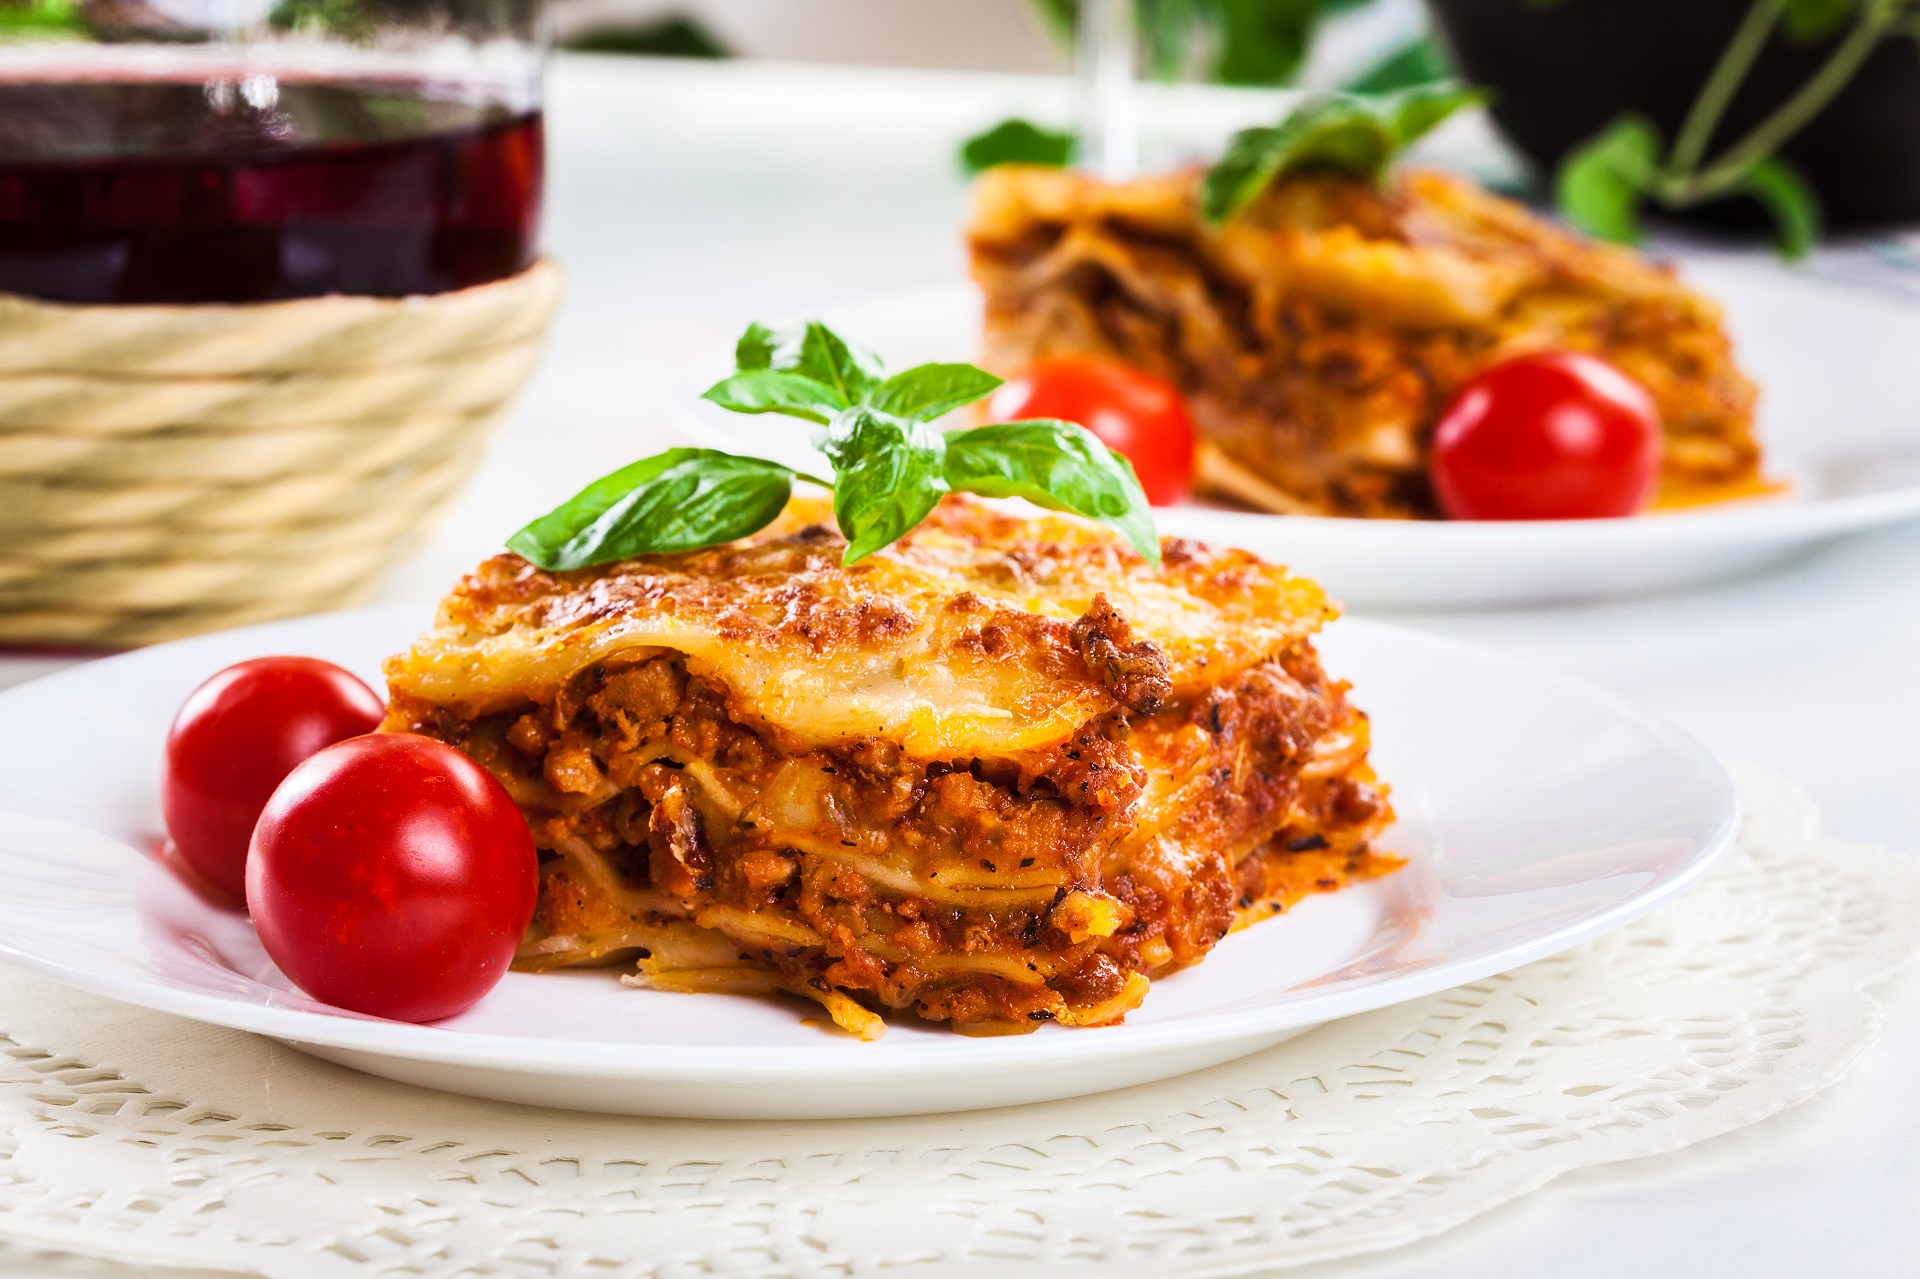 Lasagna is a type of pasta. 